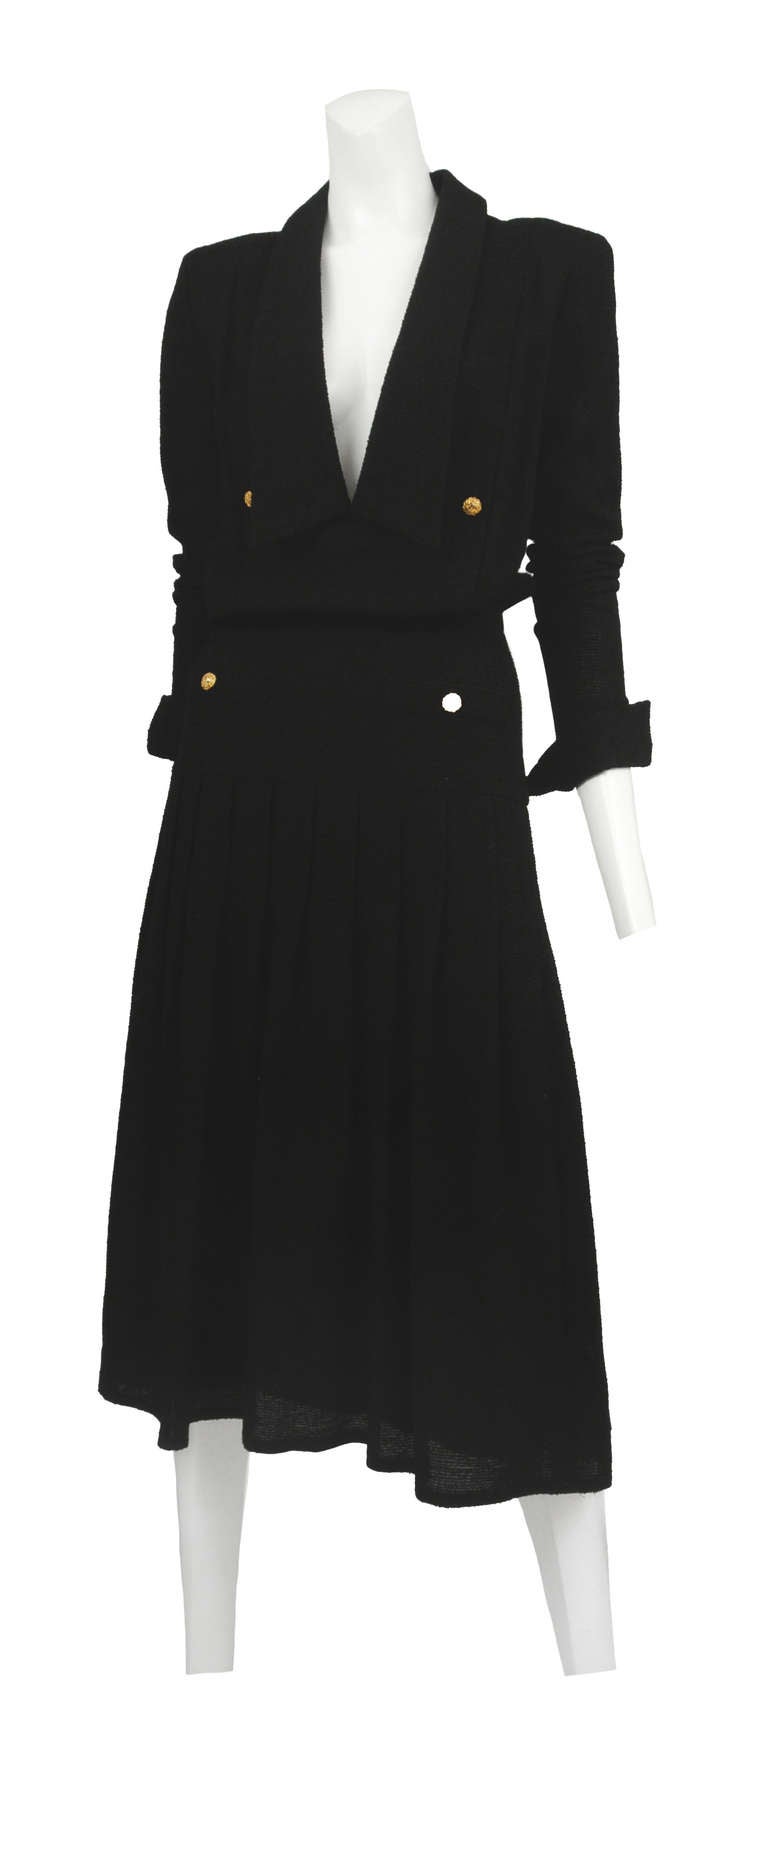 Black silk linen pleated dress with plunging collared neckline and iconic gold button detail.